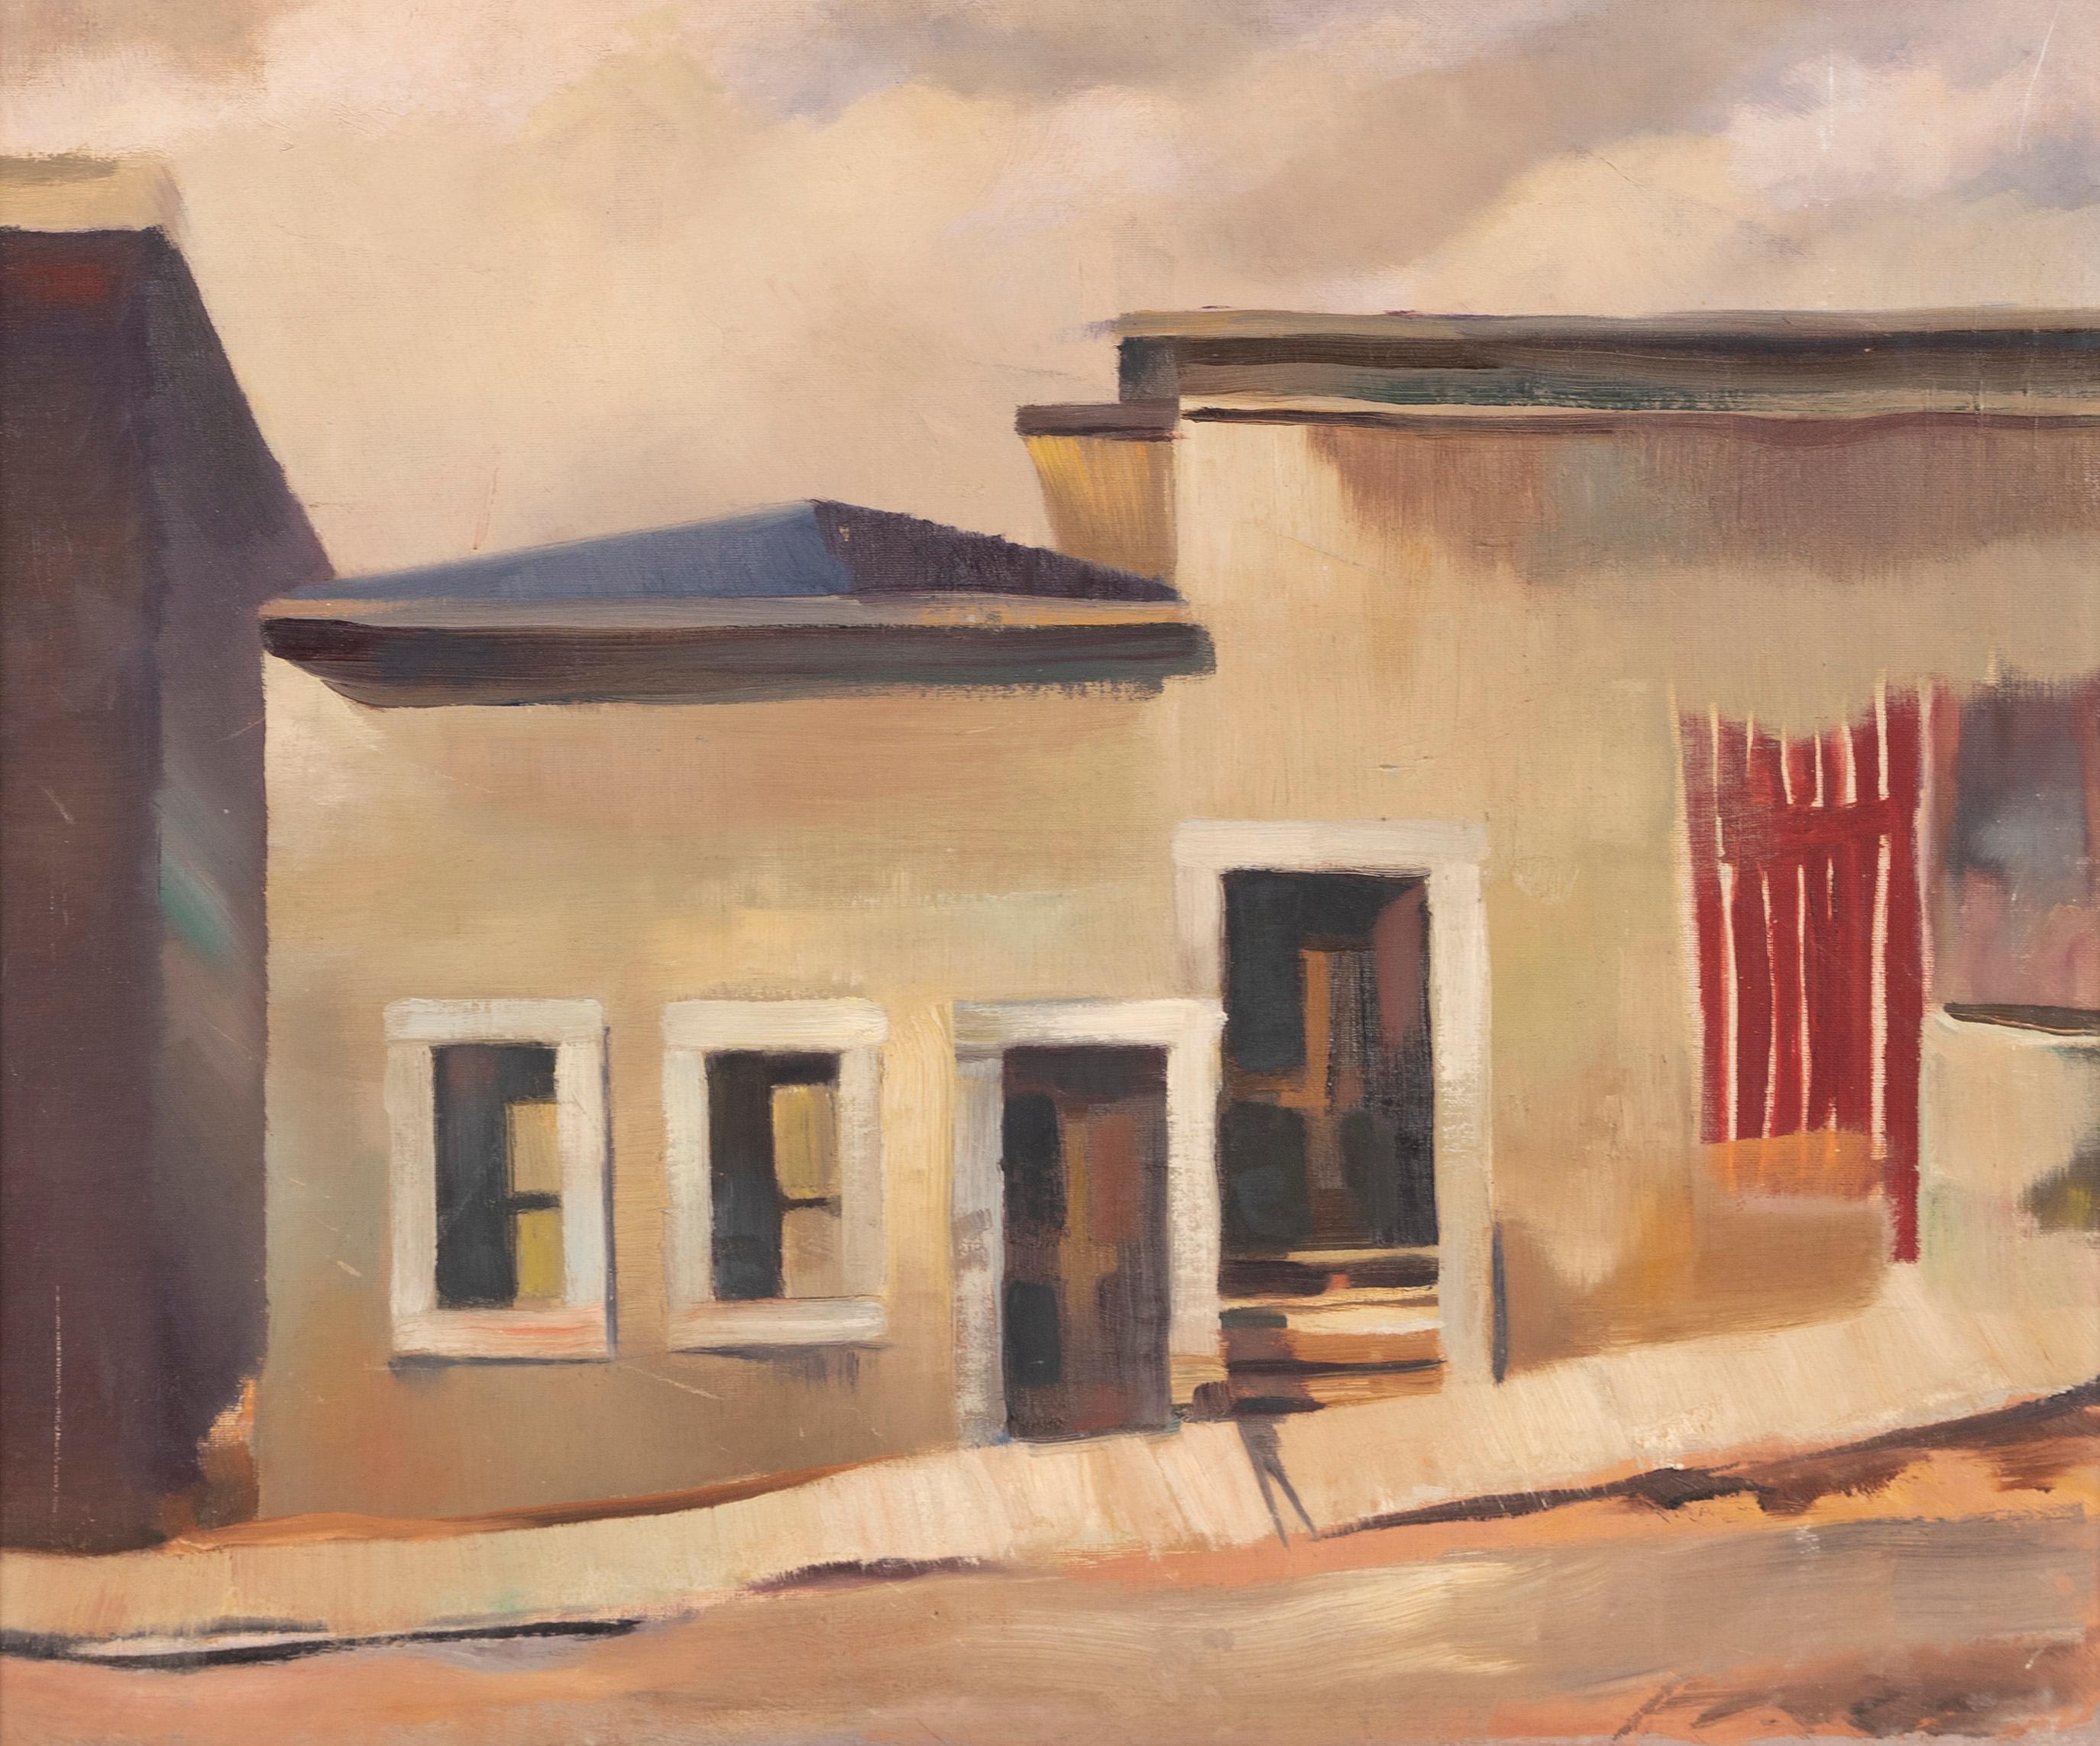 Antique American modernist street scene painting.  Oil on board, circa 1930.  Nicht signiert.  Image size, 24L x 20H.  Housed in a period  modern frame.
